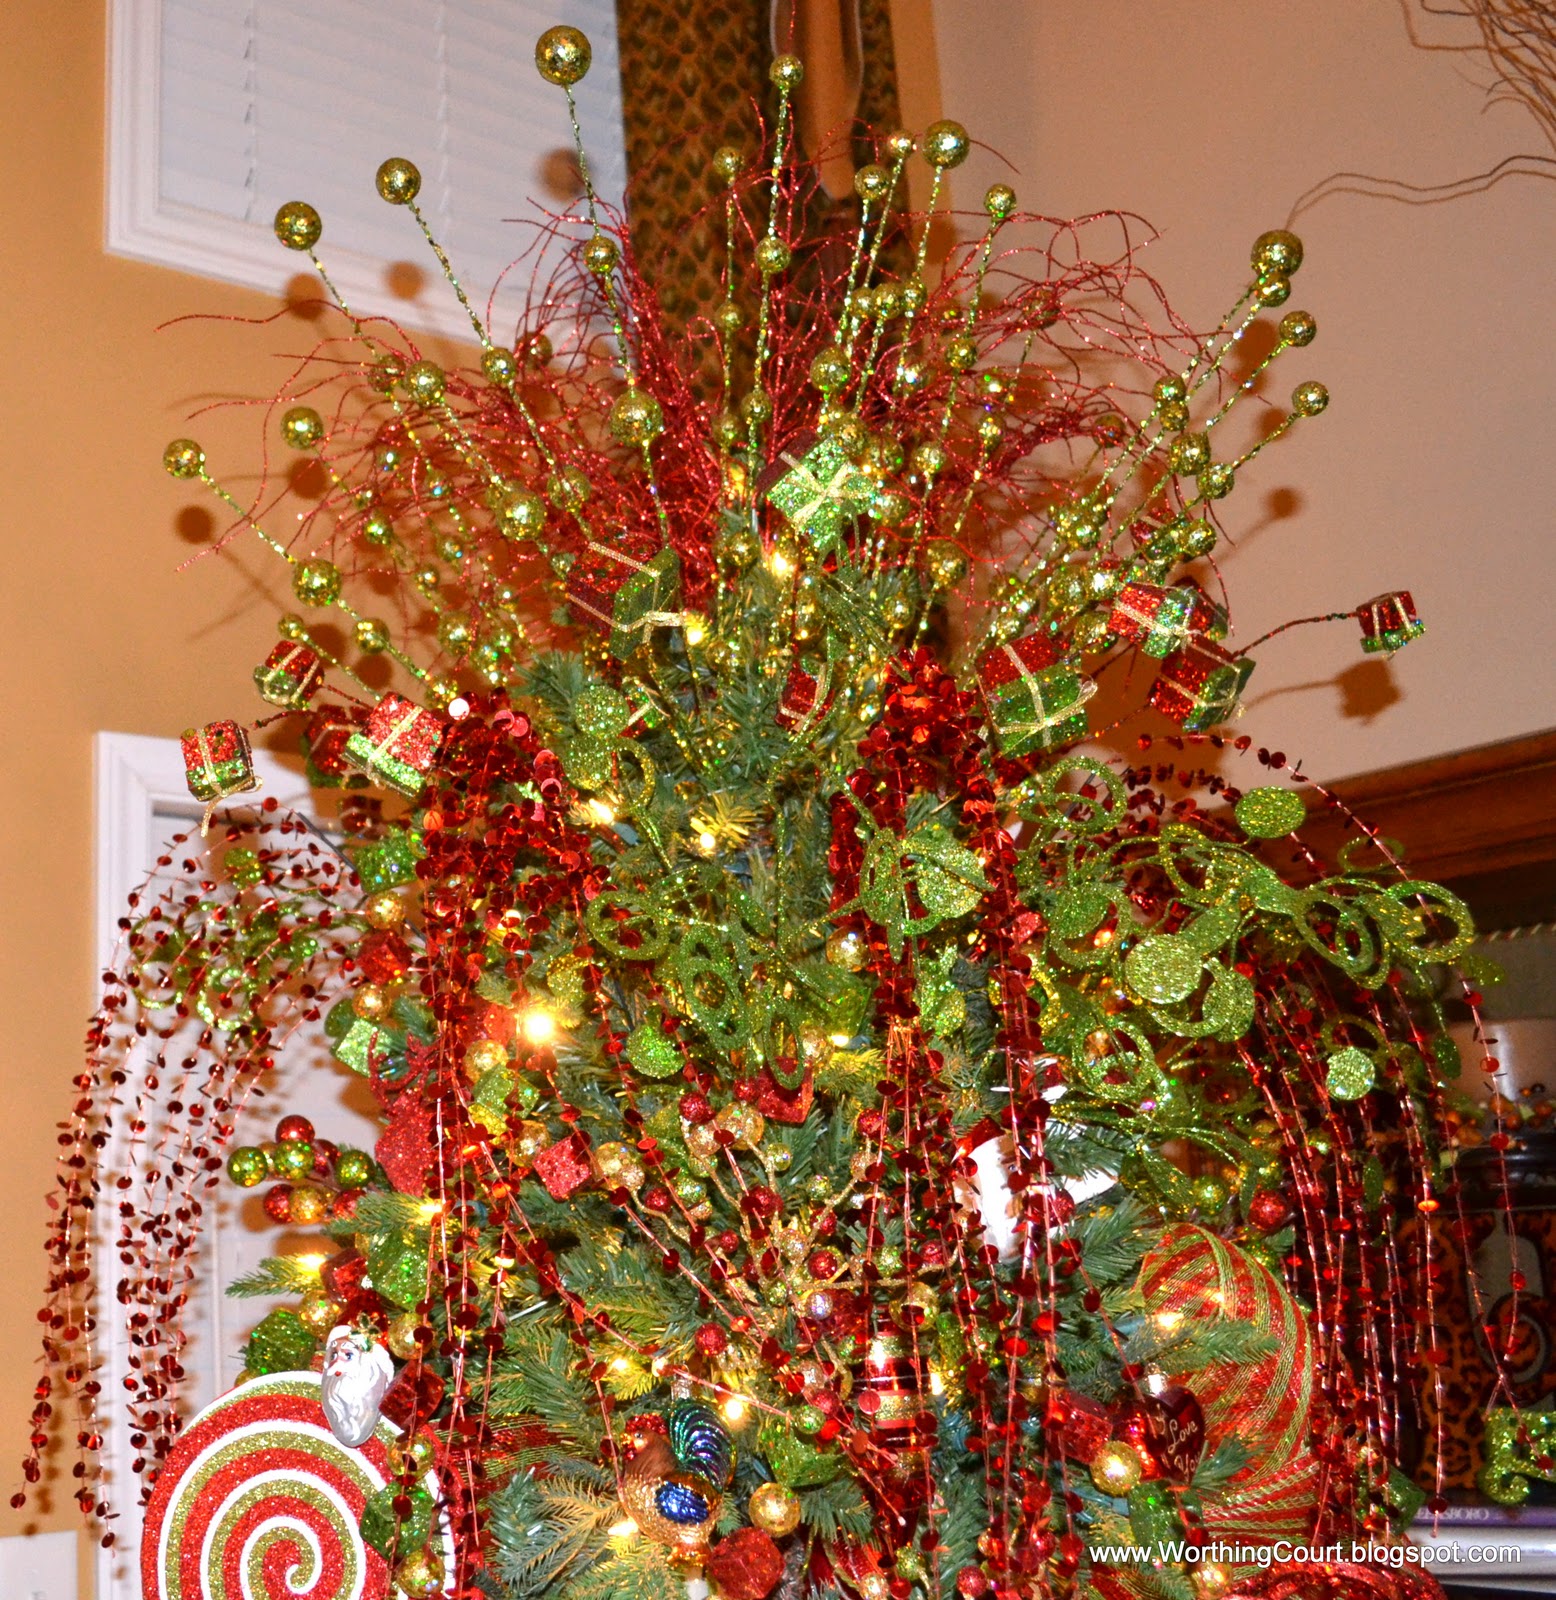 Our Whimsical Christmas Tree | Worthing Court